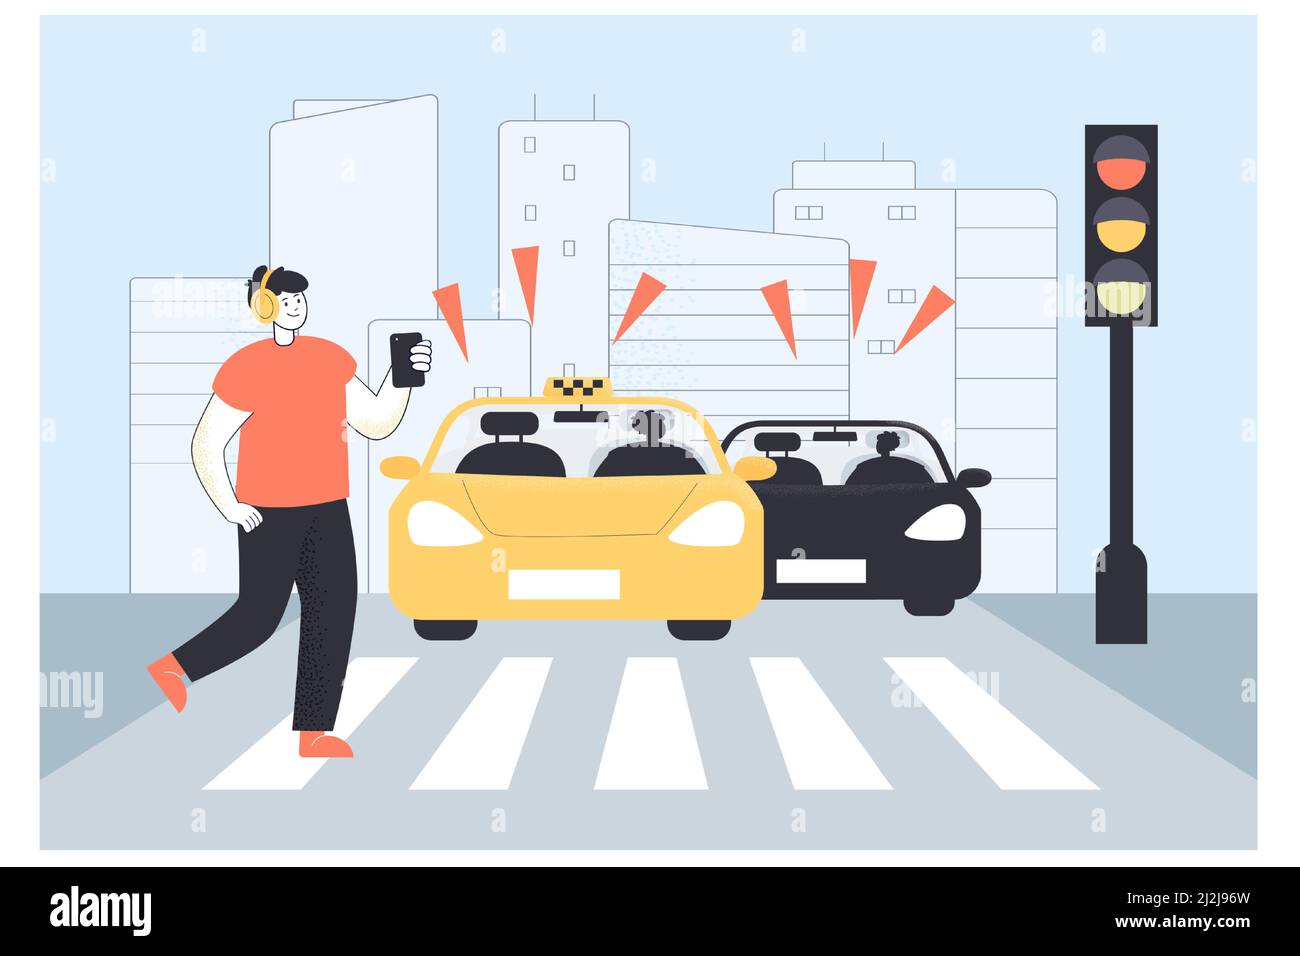 Careless boy with smartphone crossing street on red traffic lights. Careful people driving cars stopping in front of pedestrian on crosswalk flat vect Stock Vector